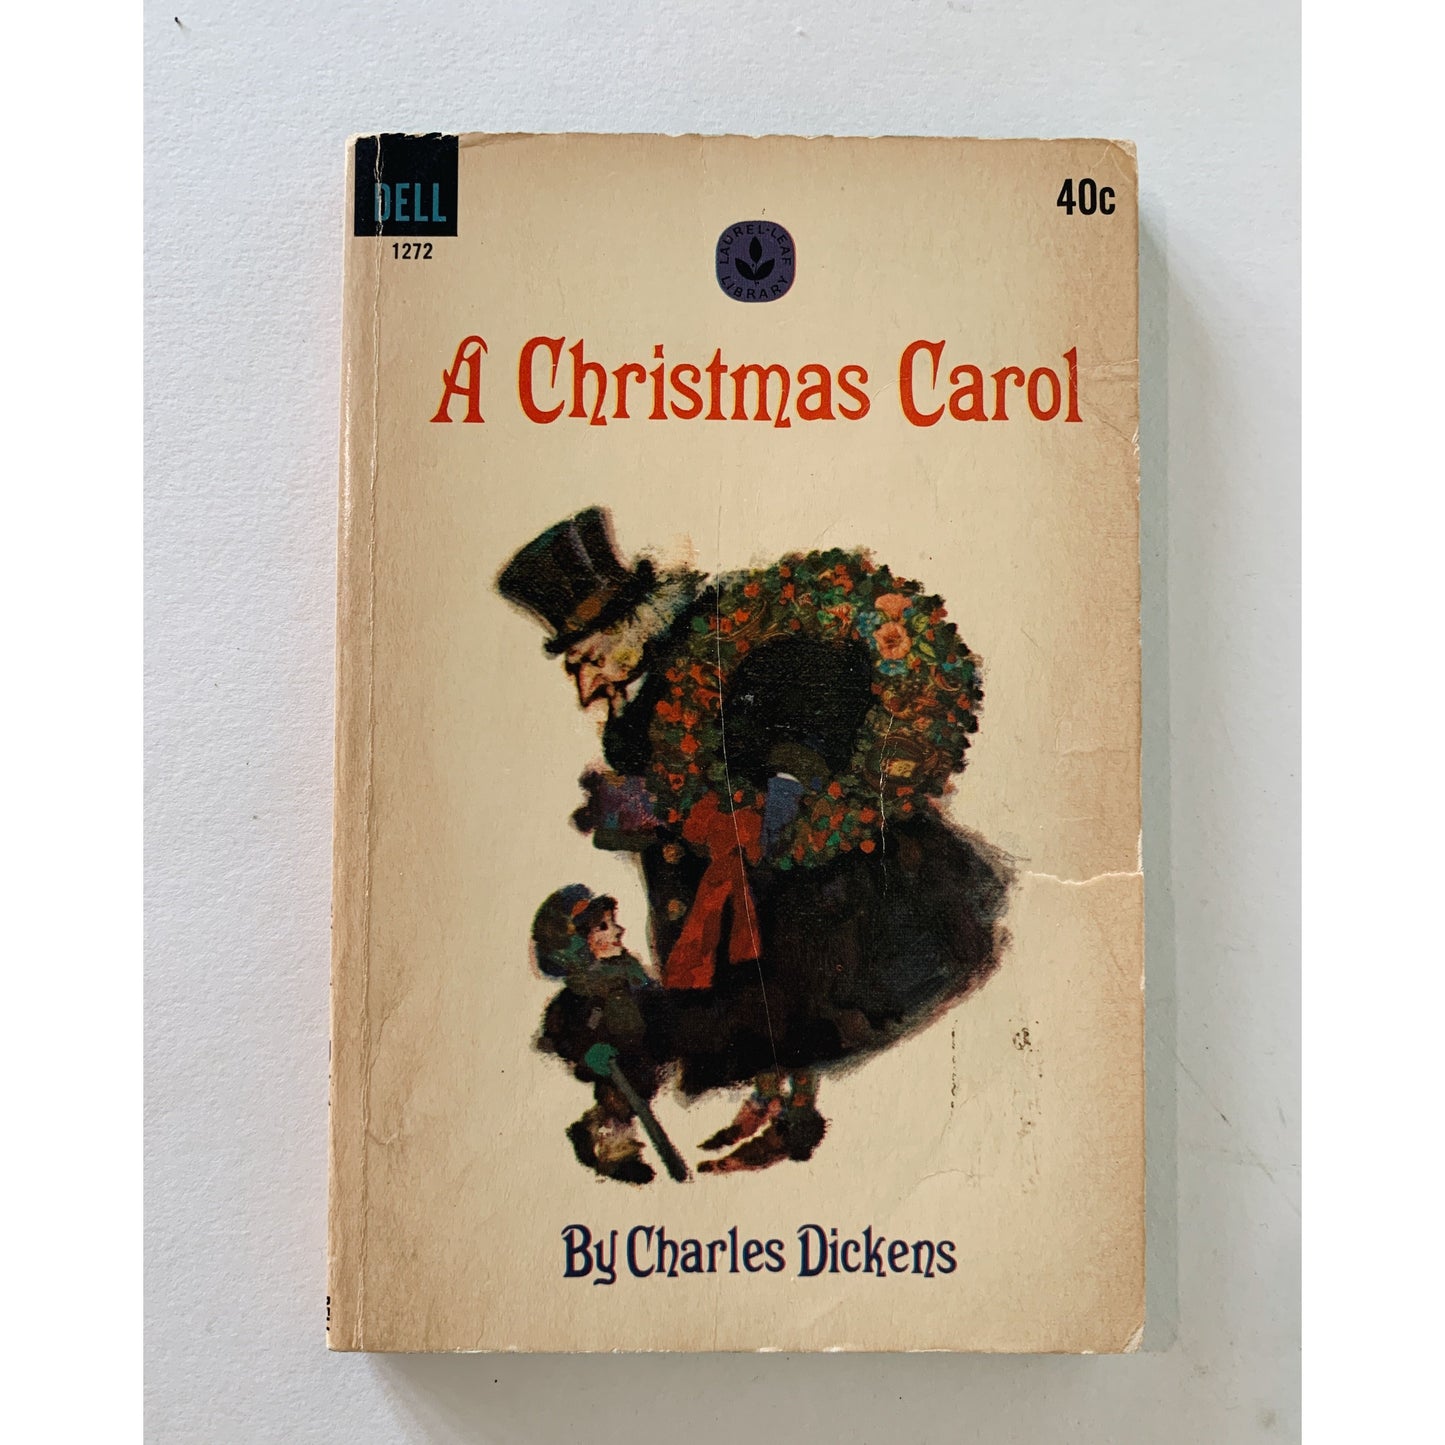 A Christmas Carol, Dell Paperback, 1964, Charles Dickens